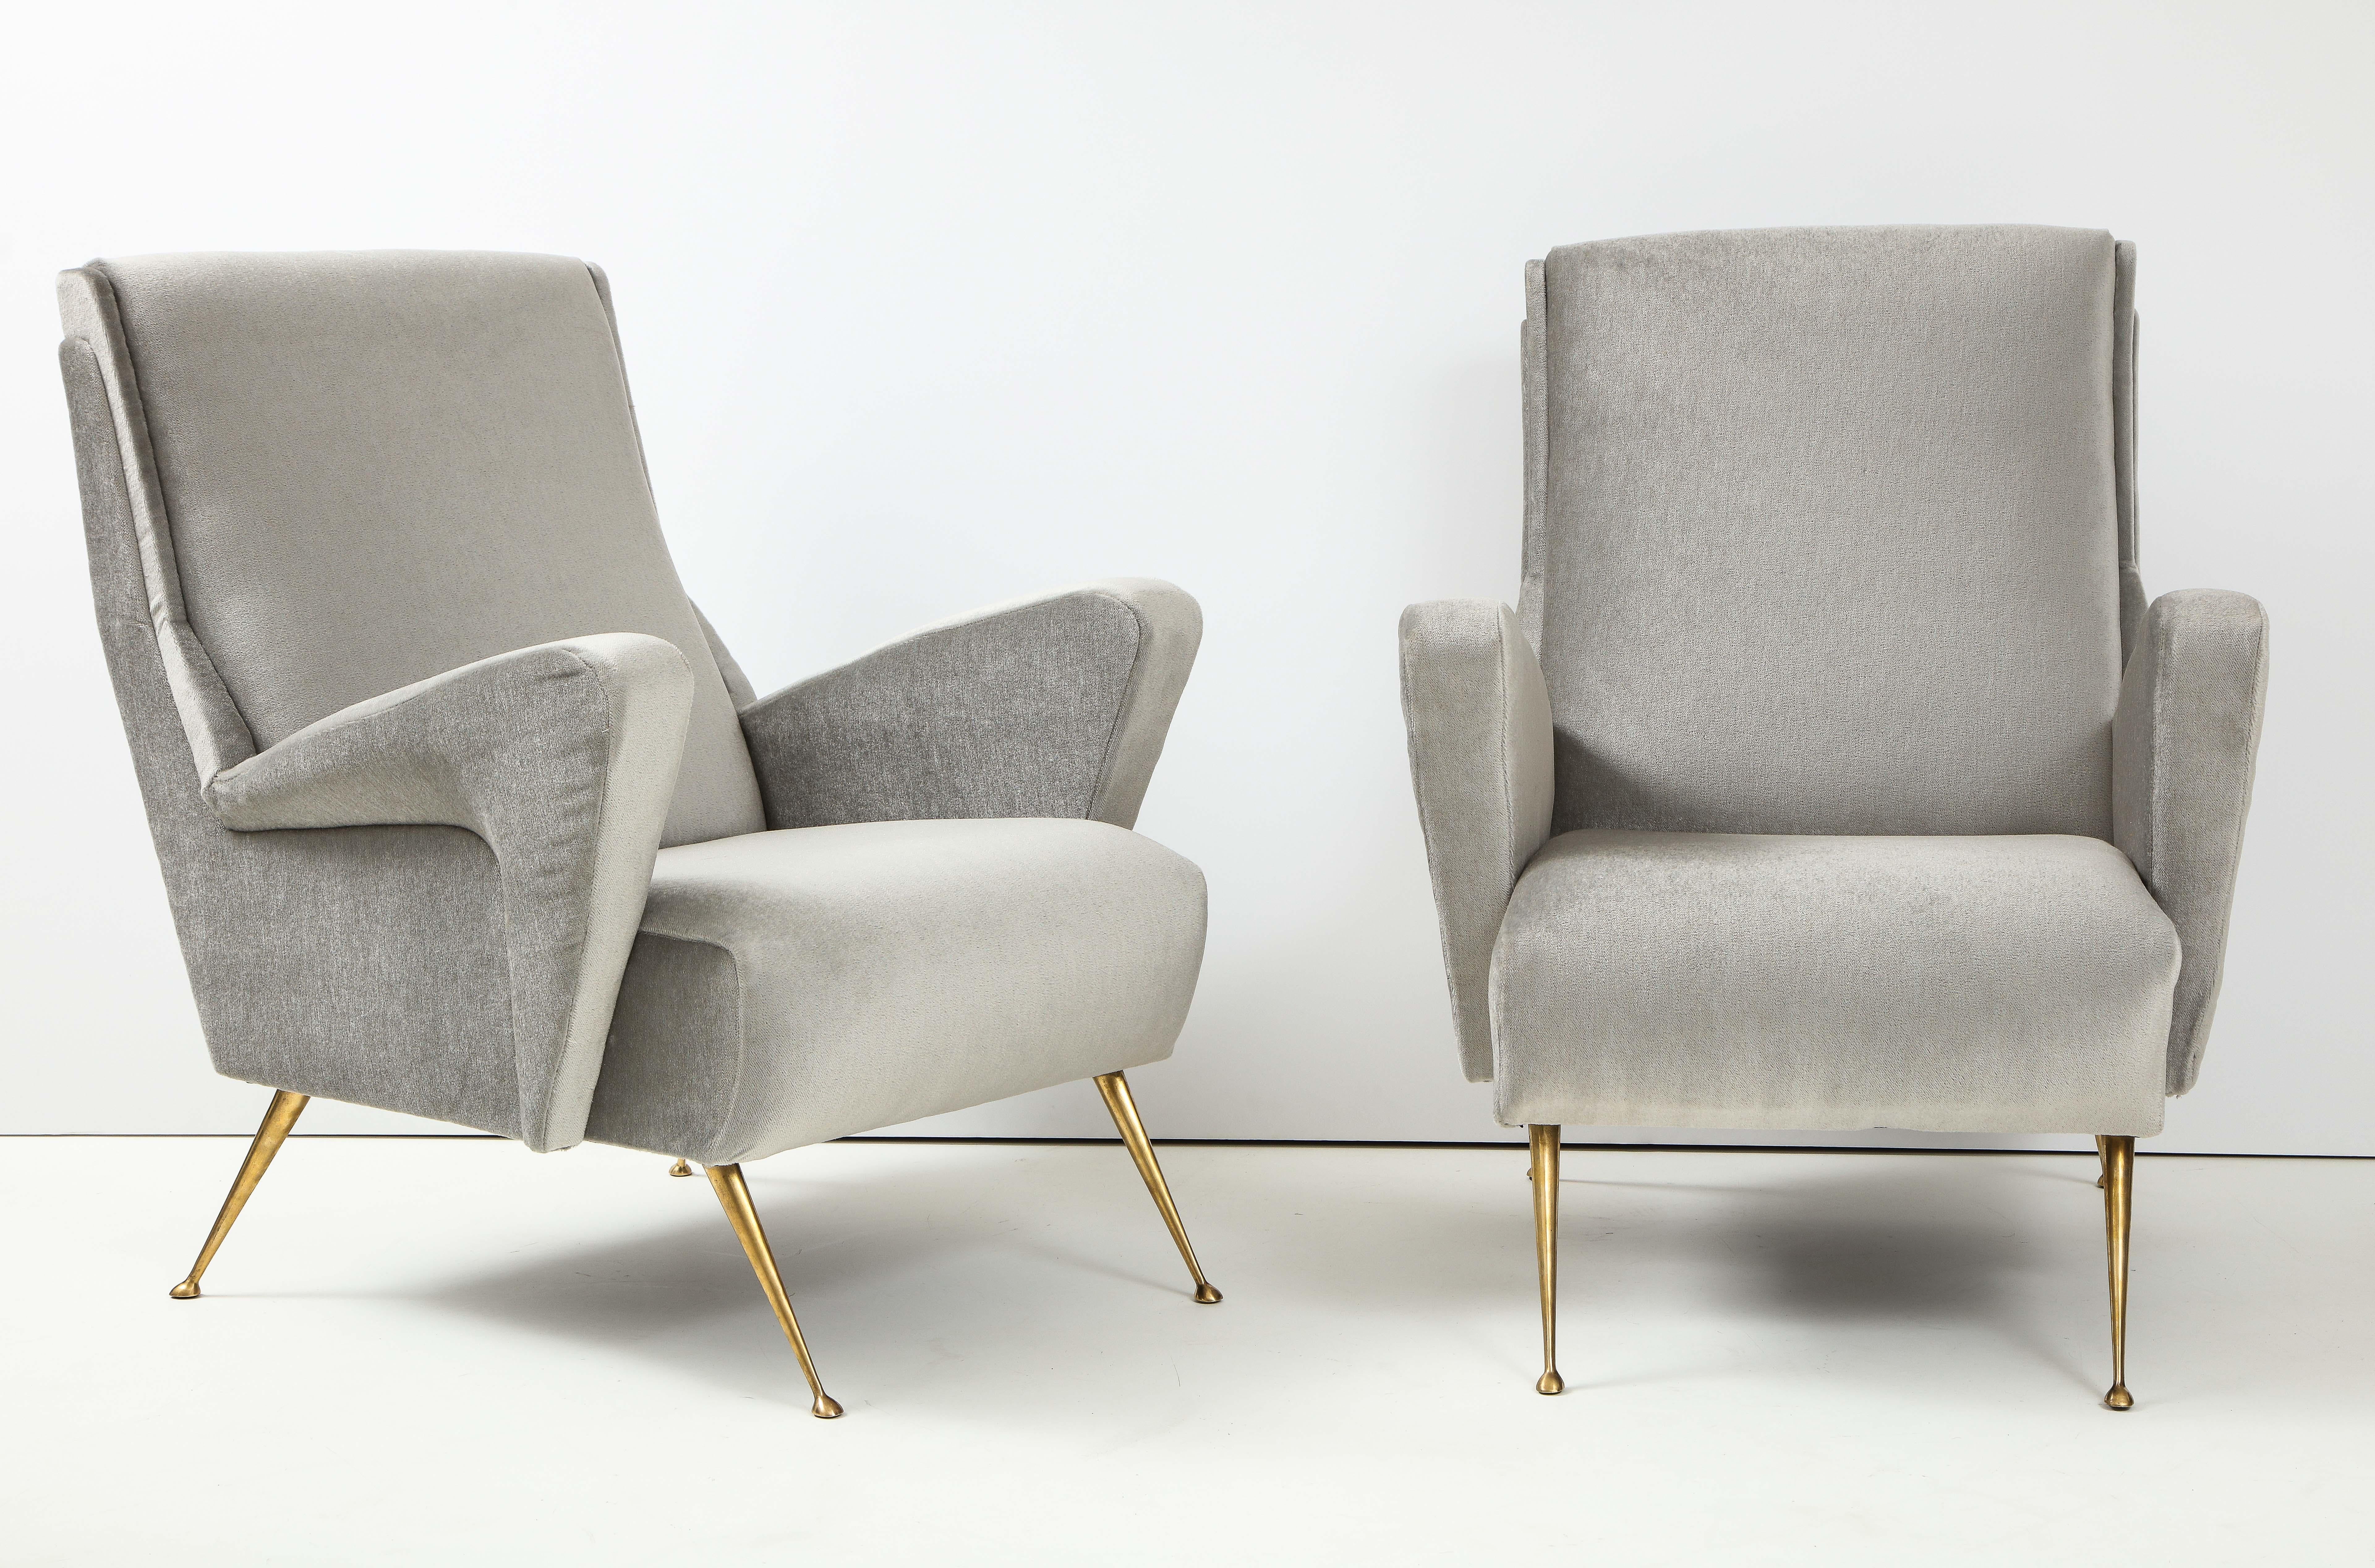 Stunning pair of 1950's modernist sculptural Italian lounge chairs with solid brass legs, fully restored and newly re-upholstered in light gray mohair.